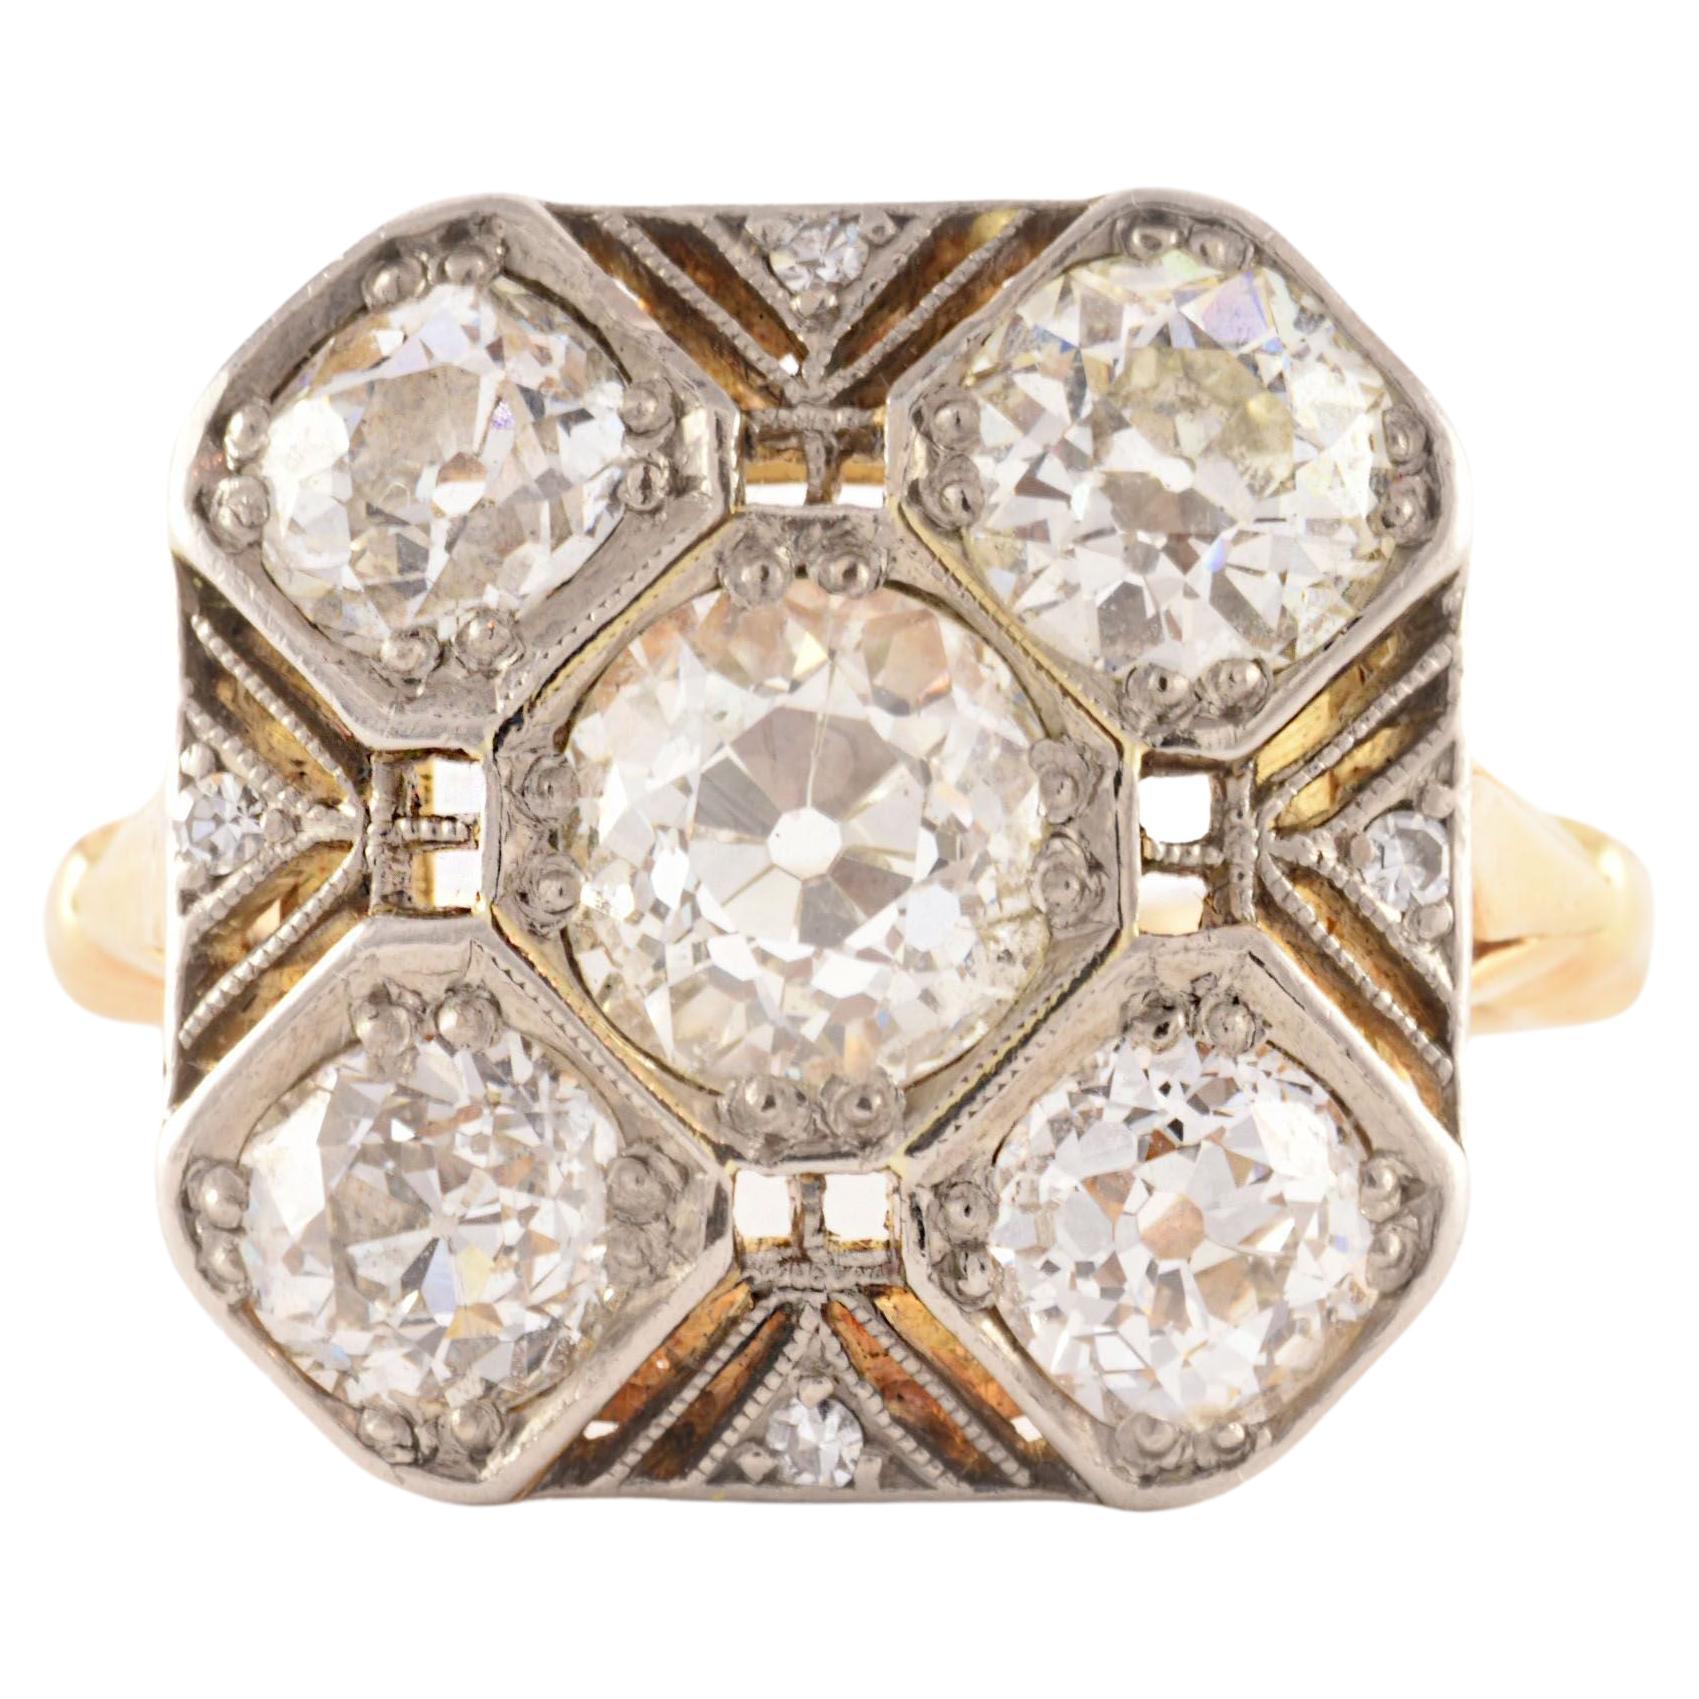  Art Deco Diamond Cocktail Ring For Sale